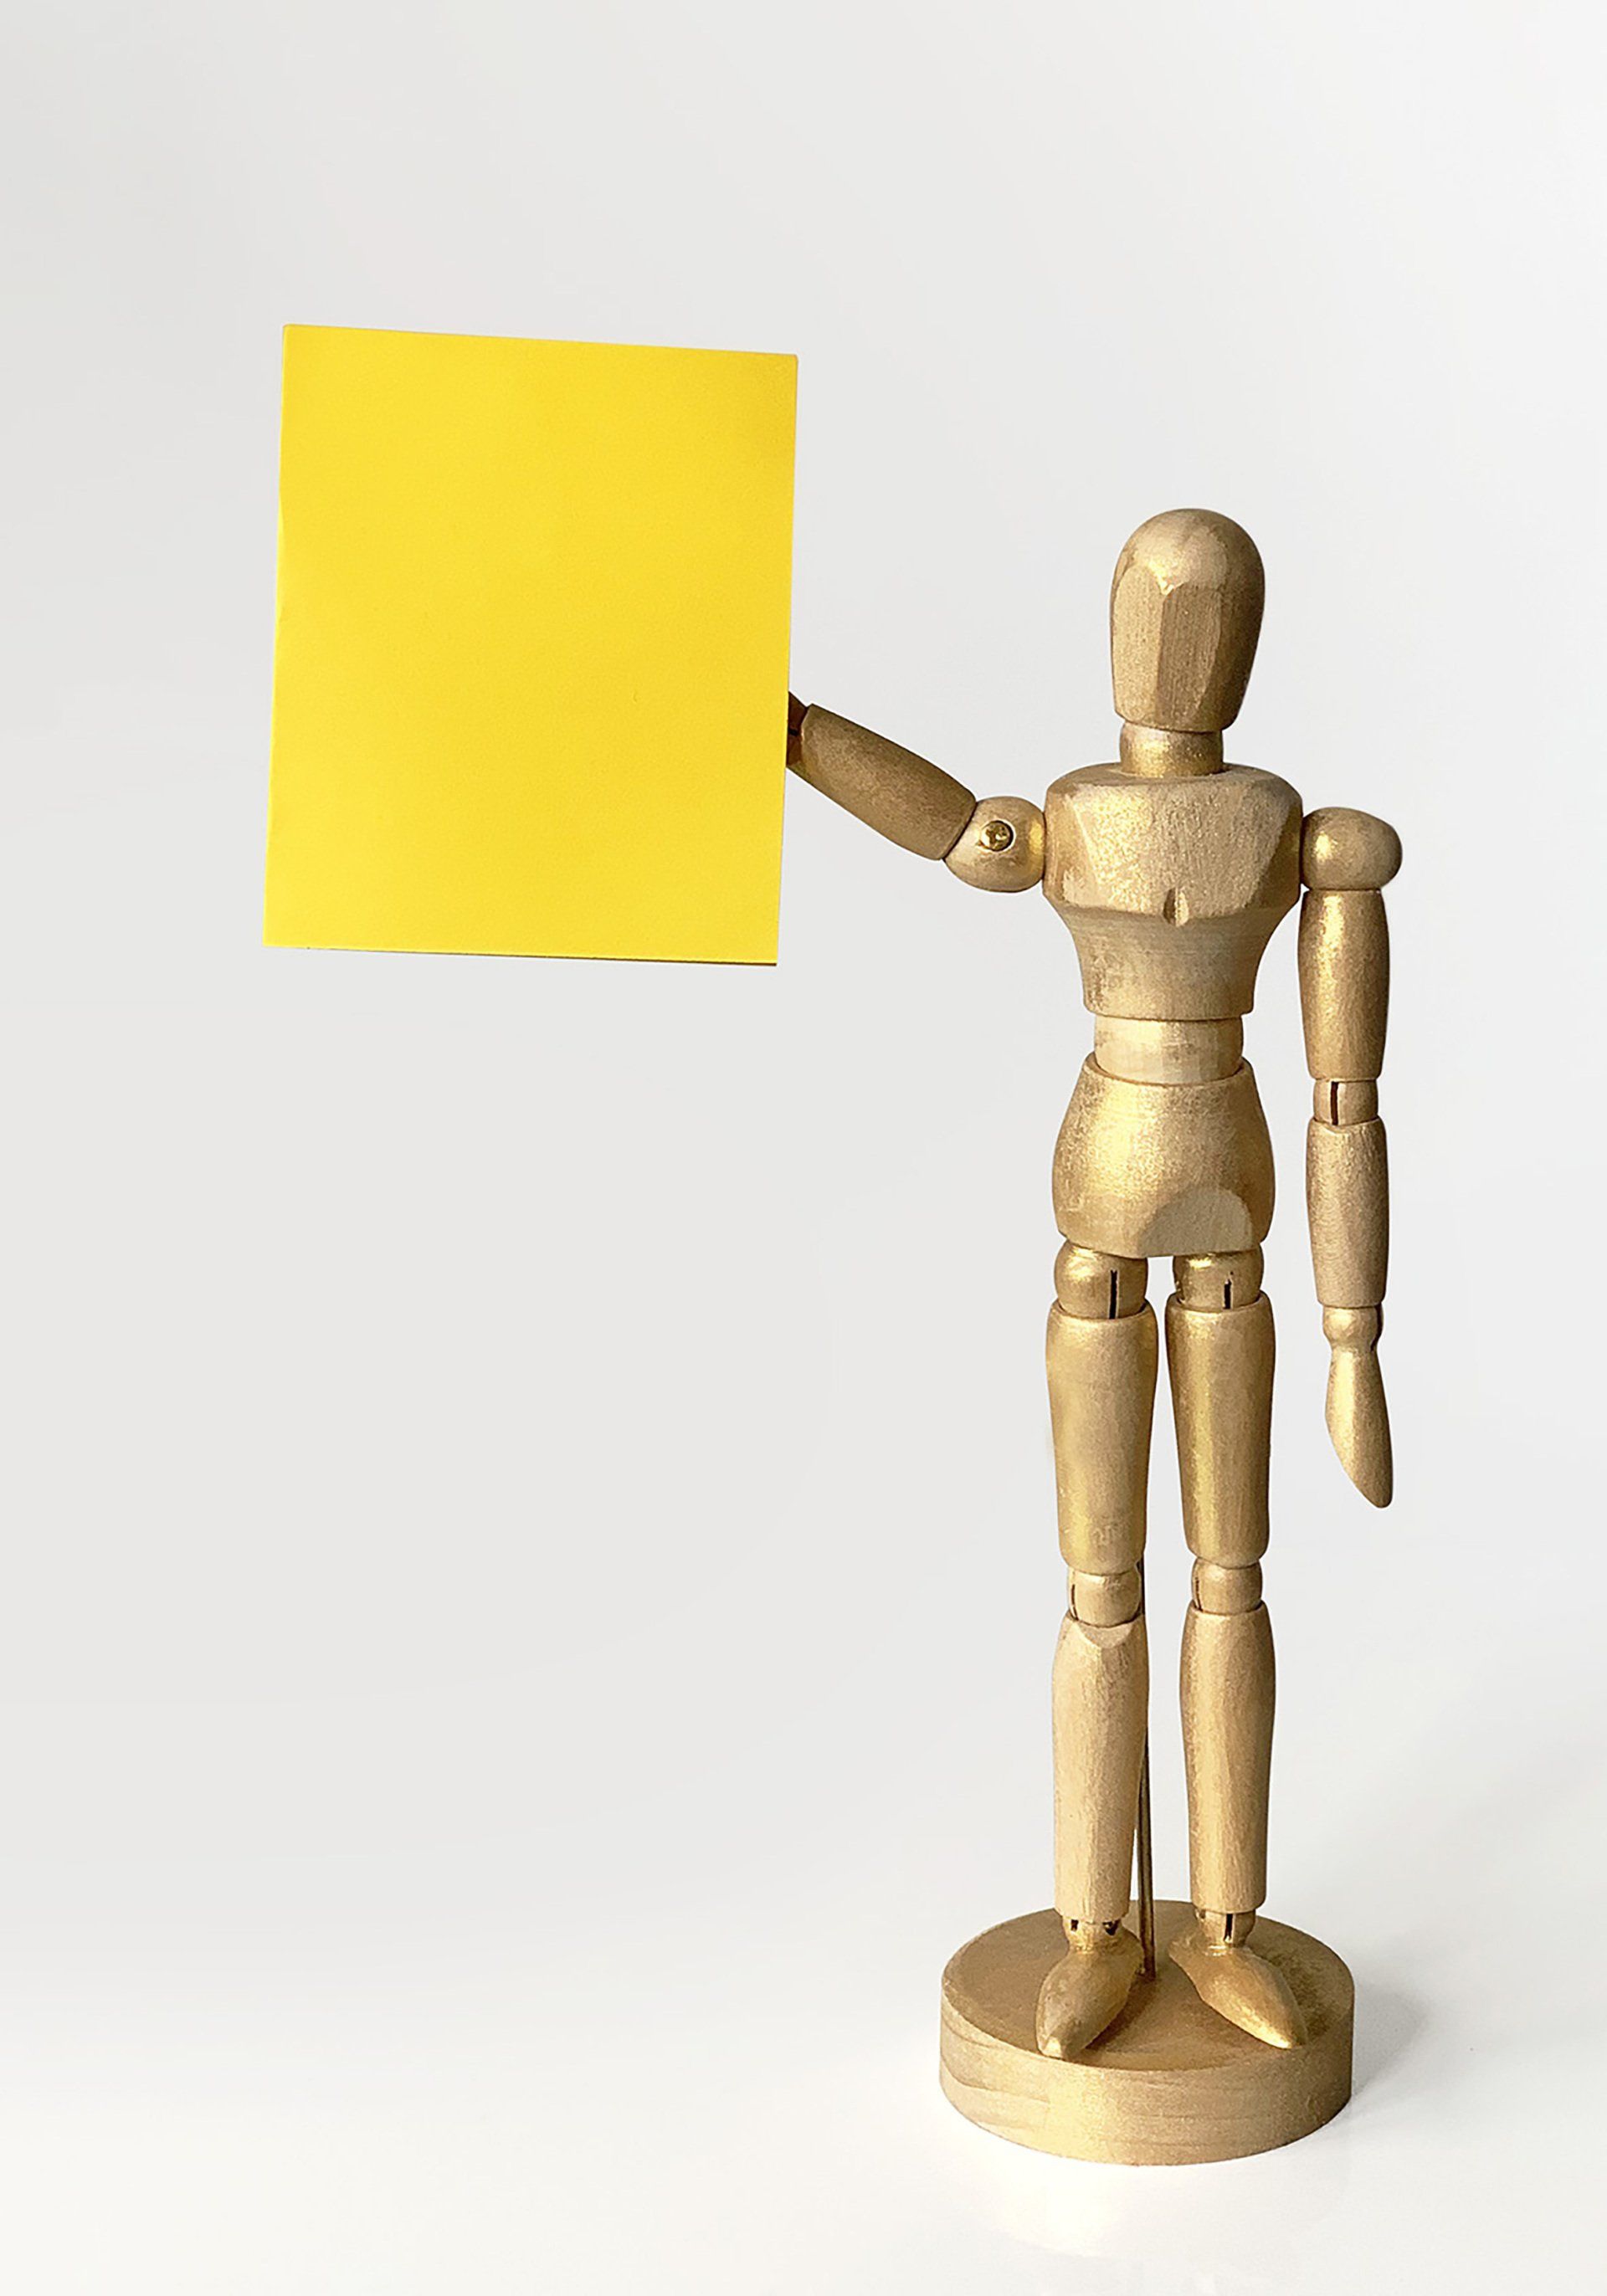 A small figurine holding a post-it note